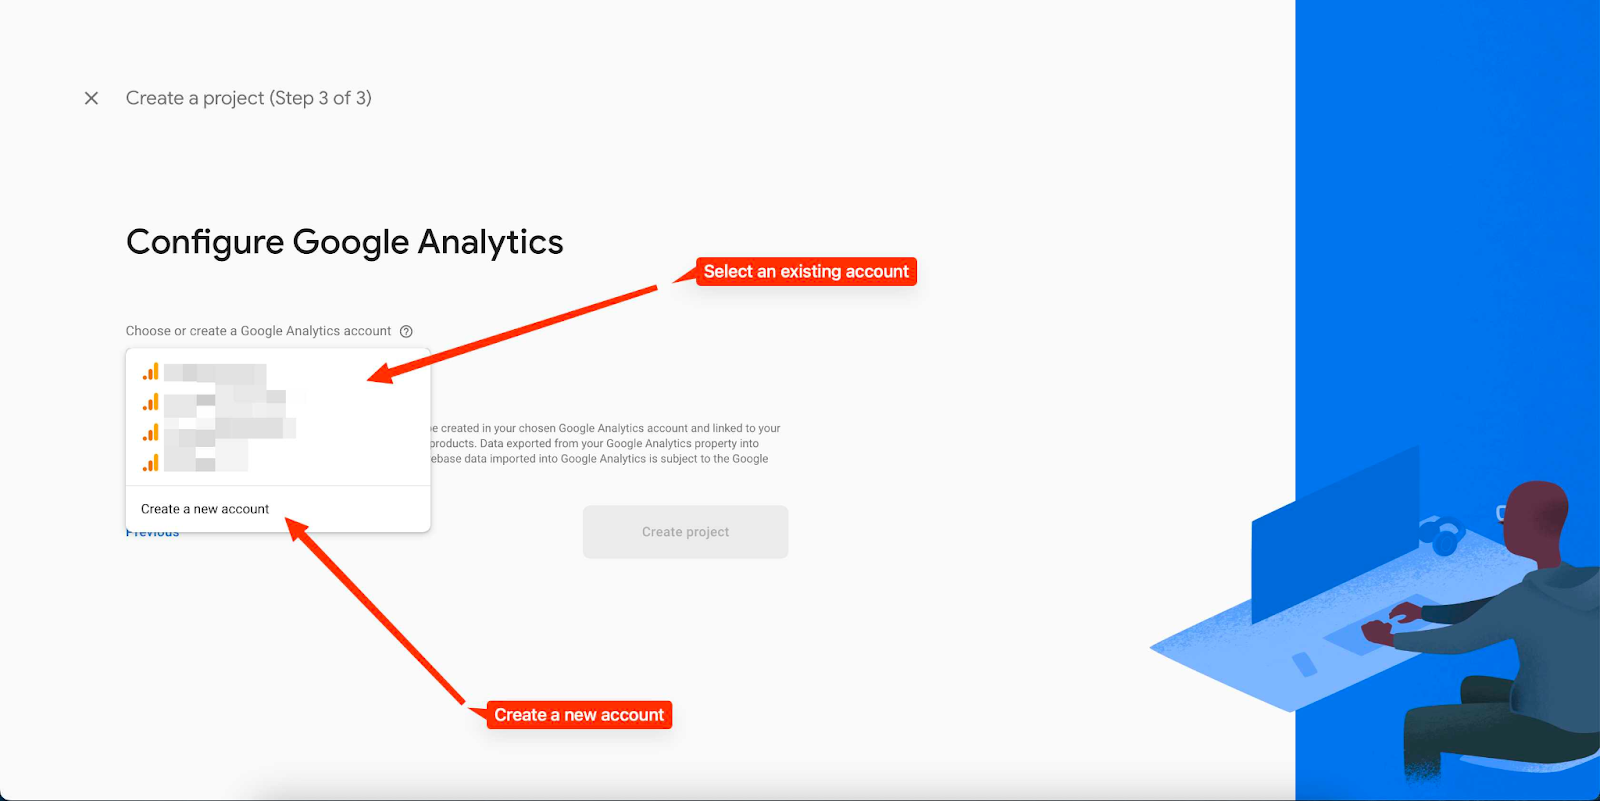 This is an image that shows how to configure Google Analyticvs